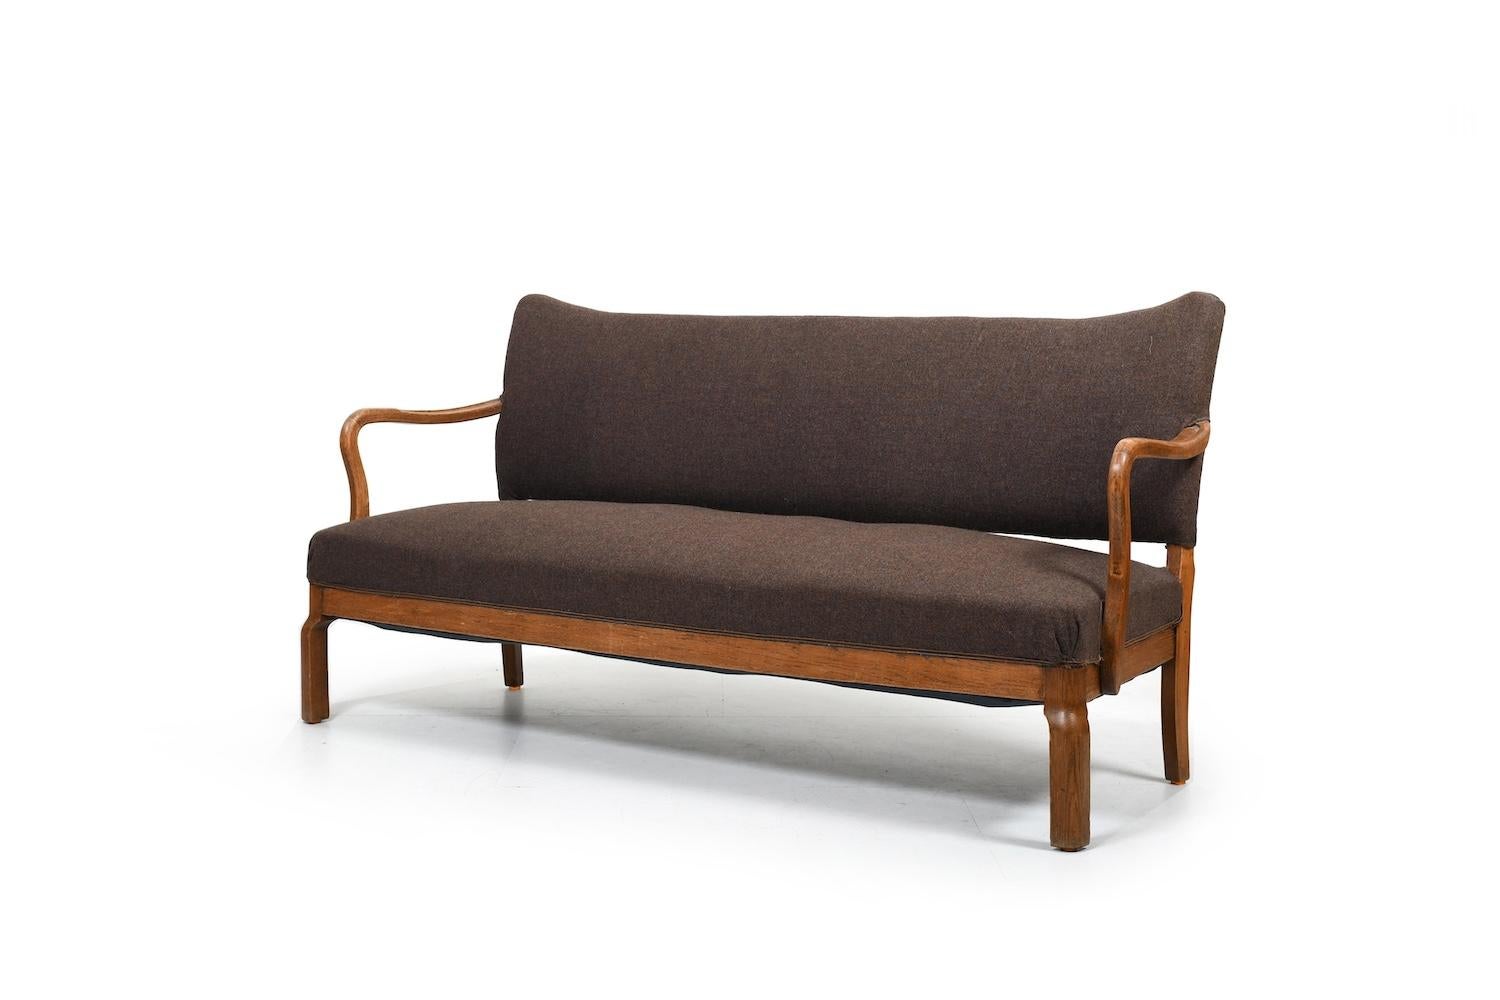 Rarely offered Slagelse Møbelværk sofa in sold oak and brown wool fabric. Produced in 1930s. In good vintage condition, with nice old patinated oak.